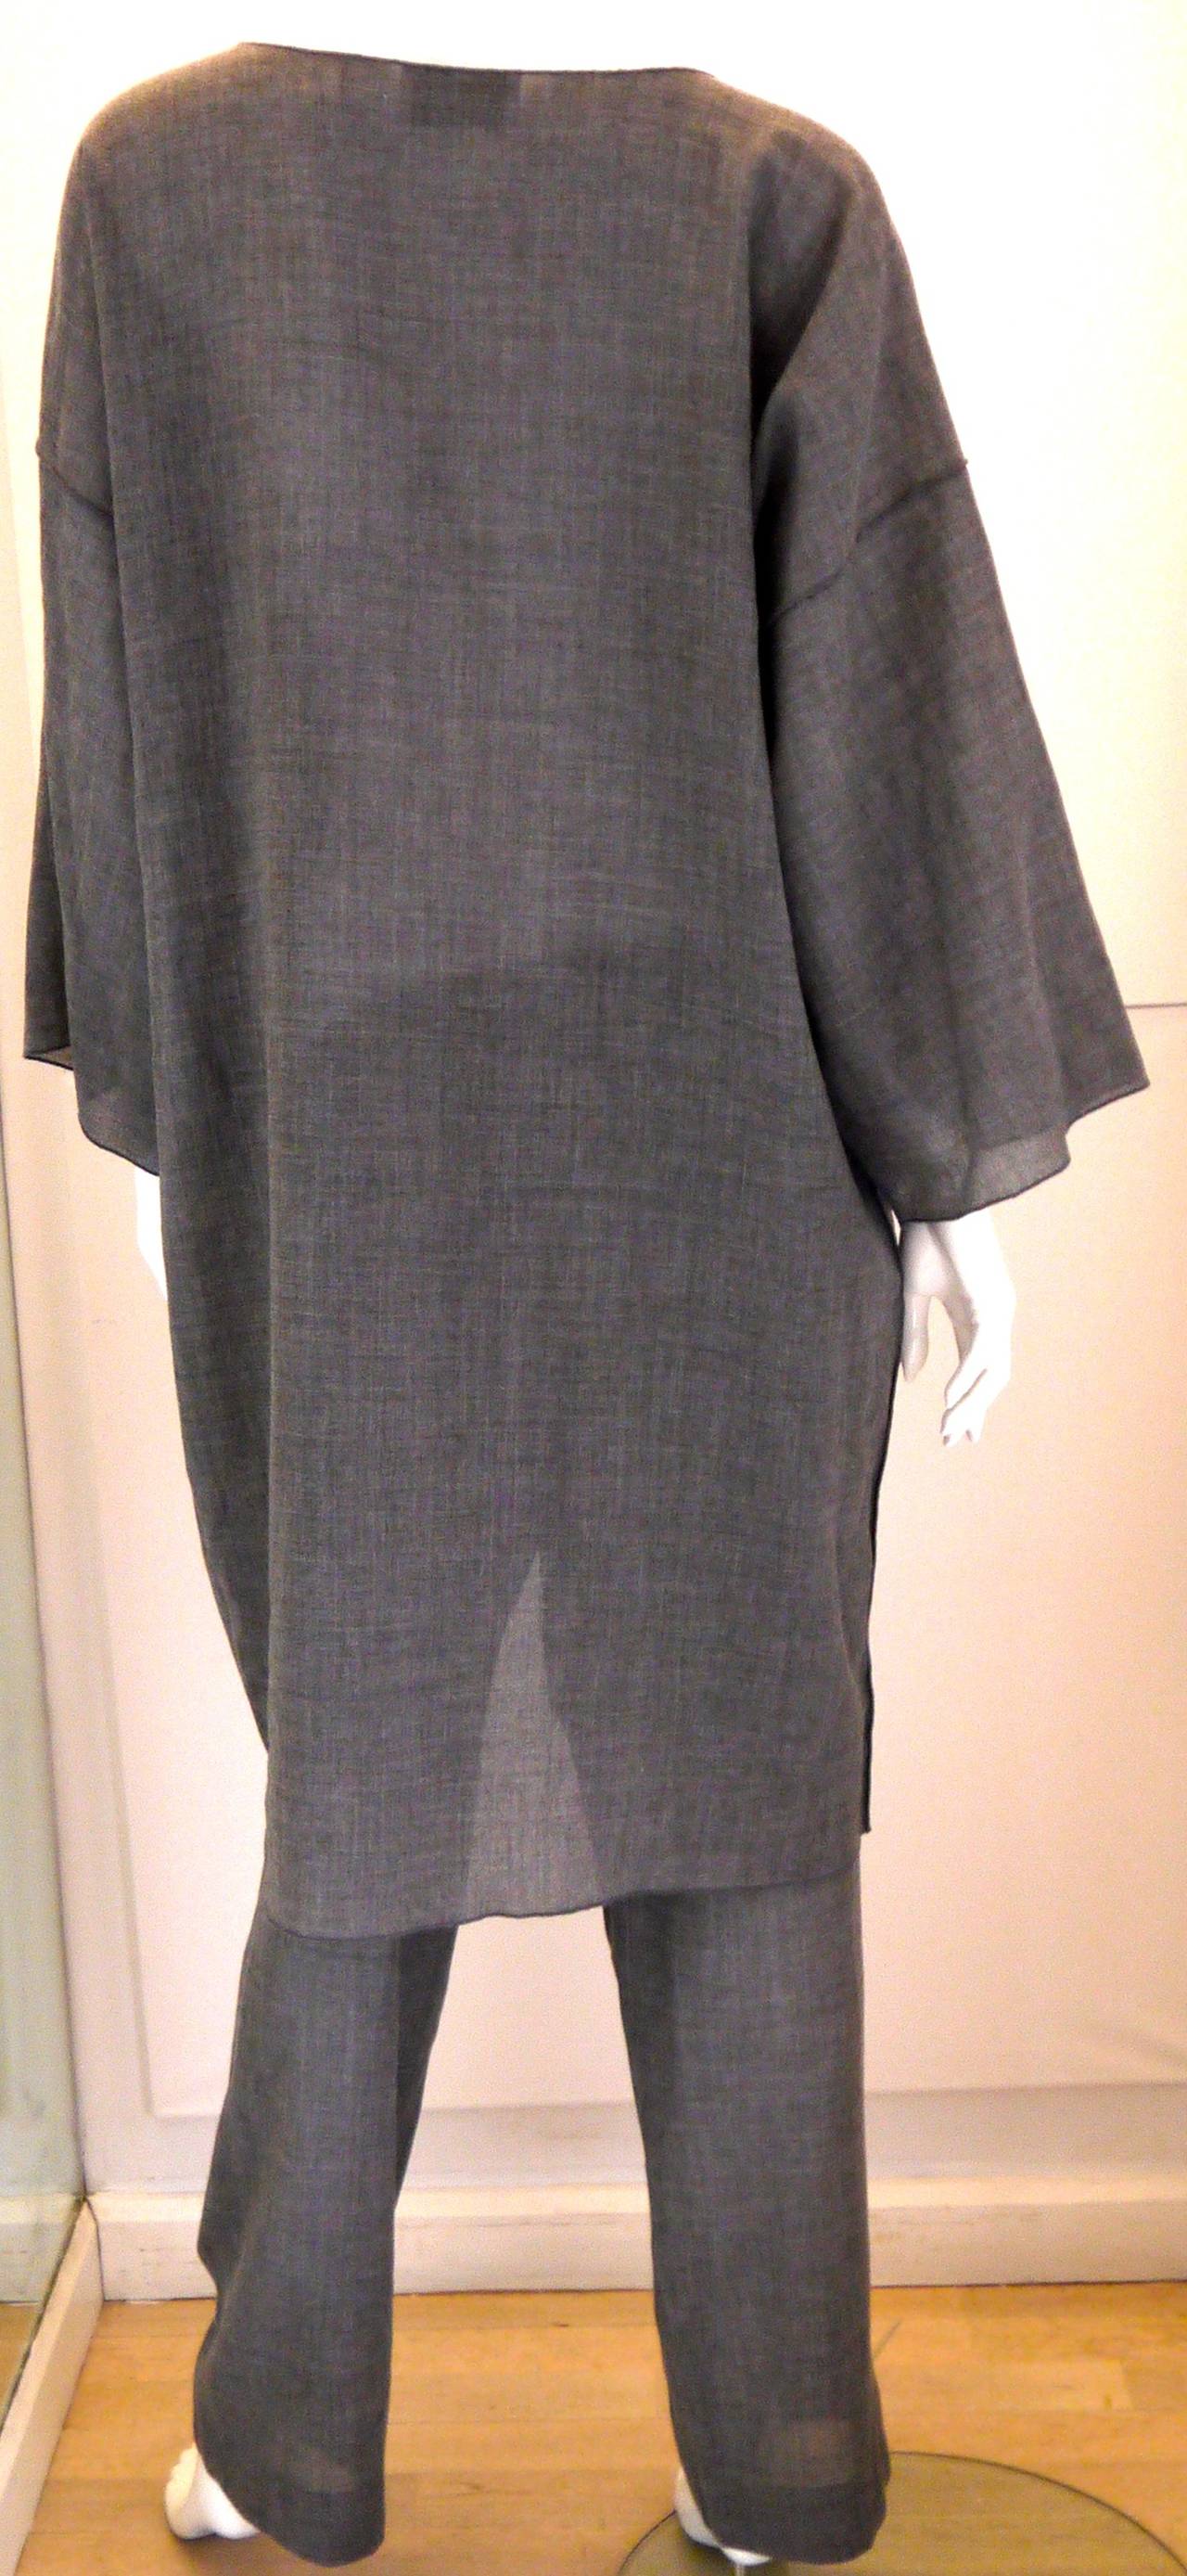 Gorgeous two piece Zoran outfit. Gray 2 piece outfit. Wool top and pants. Top is designed to stay open. Pants have an adjustable elastic size, so they contour to fit varying sizes. Great for casual occasions and elegant affairs. Extremely high